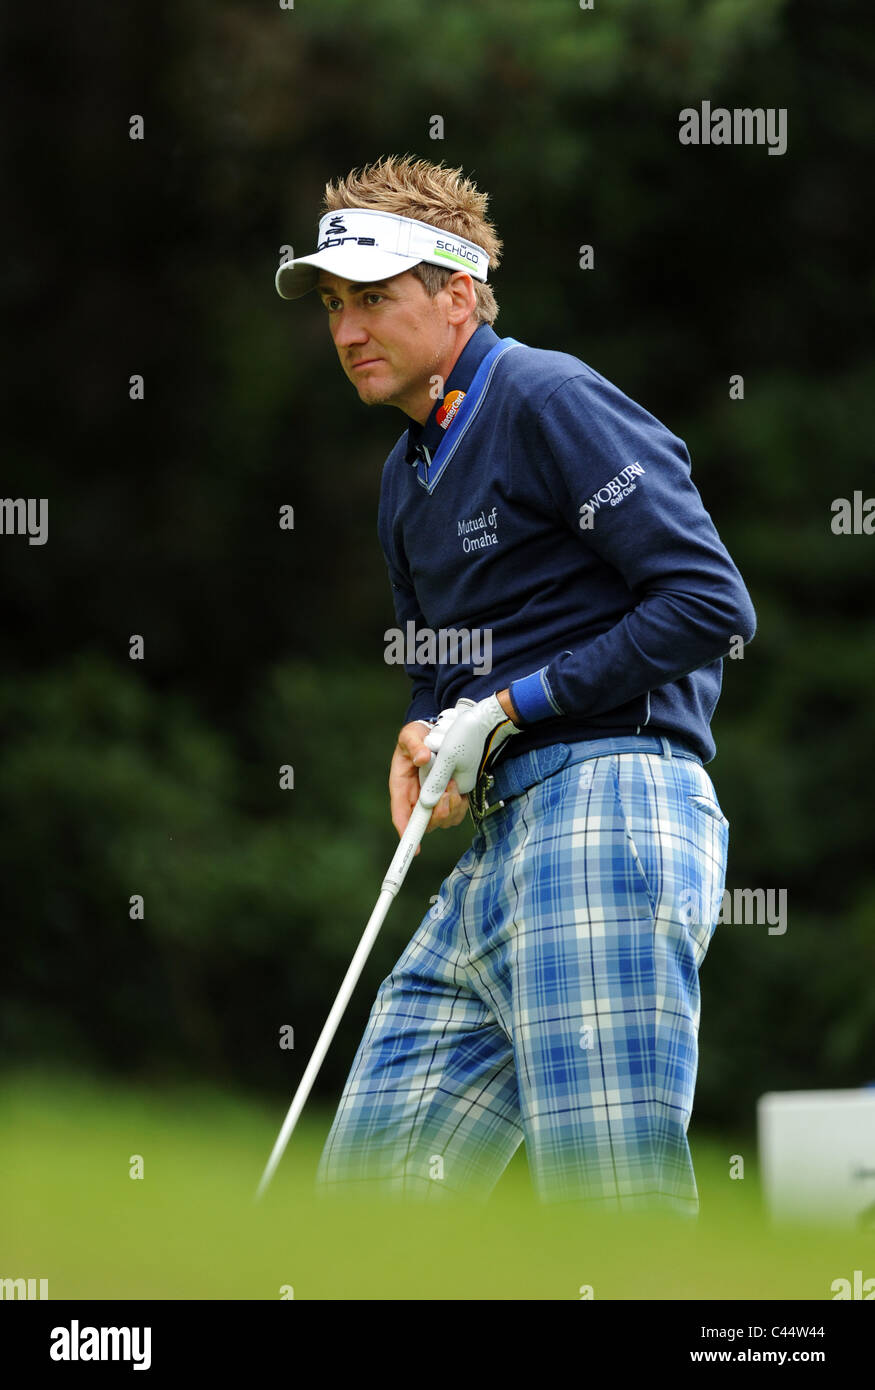 Professional Golfer In Ian Poulter plays a shot Stock Photo